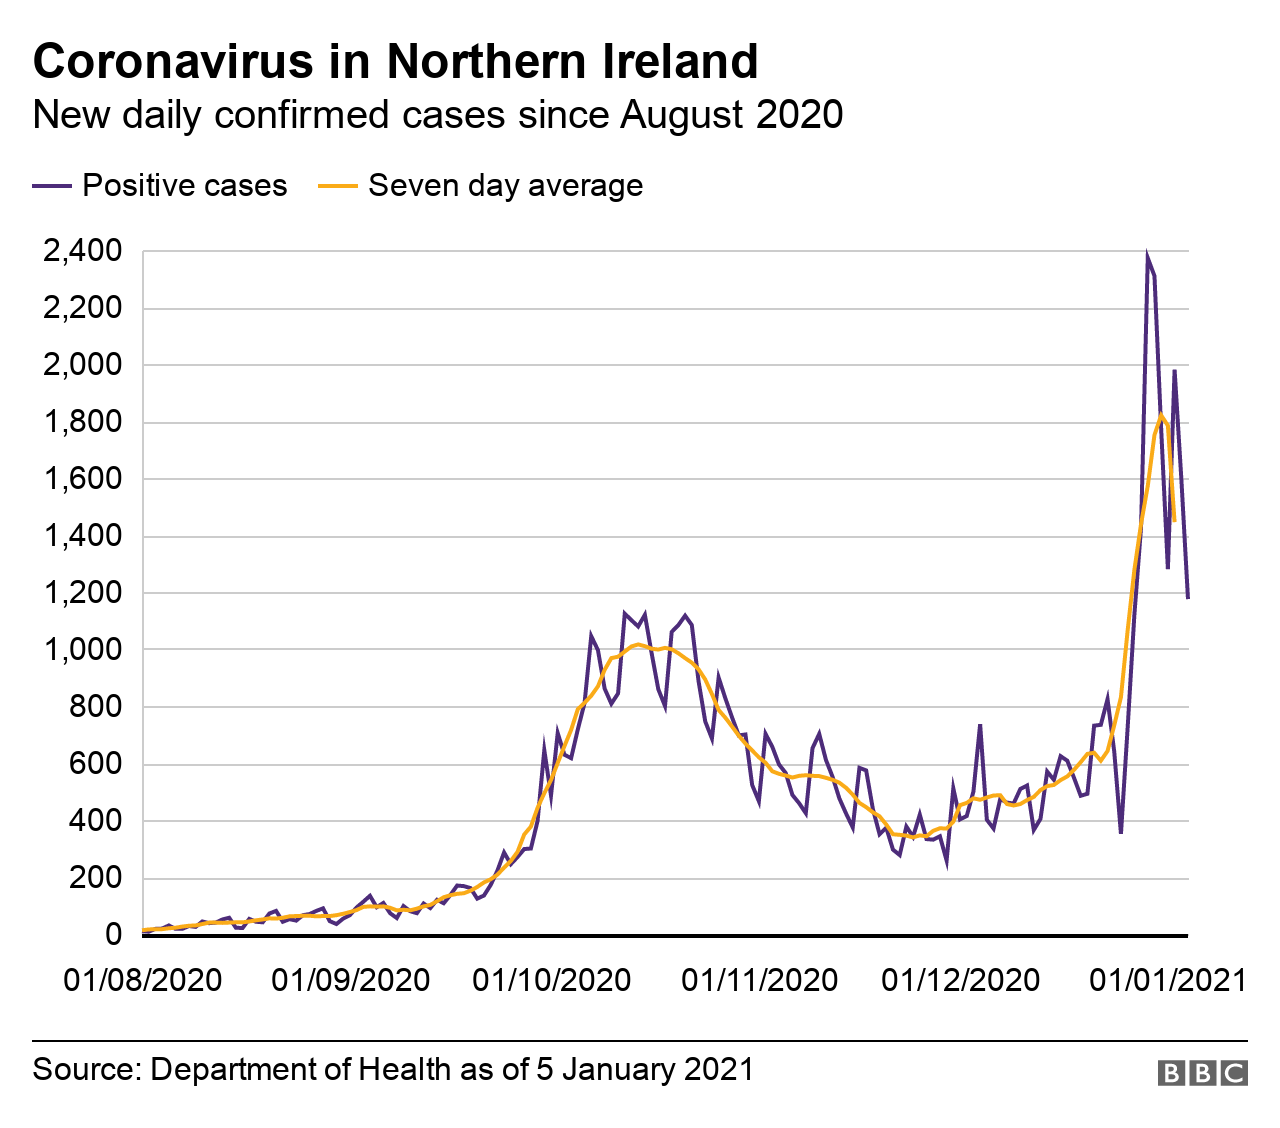 Graph showing new daily coronavirus cases in NI since August 2020